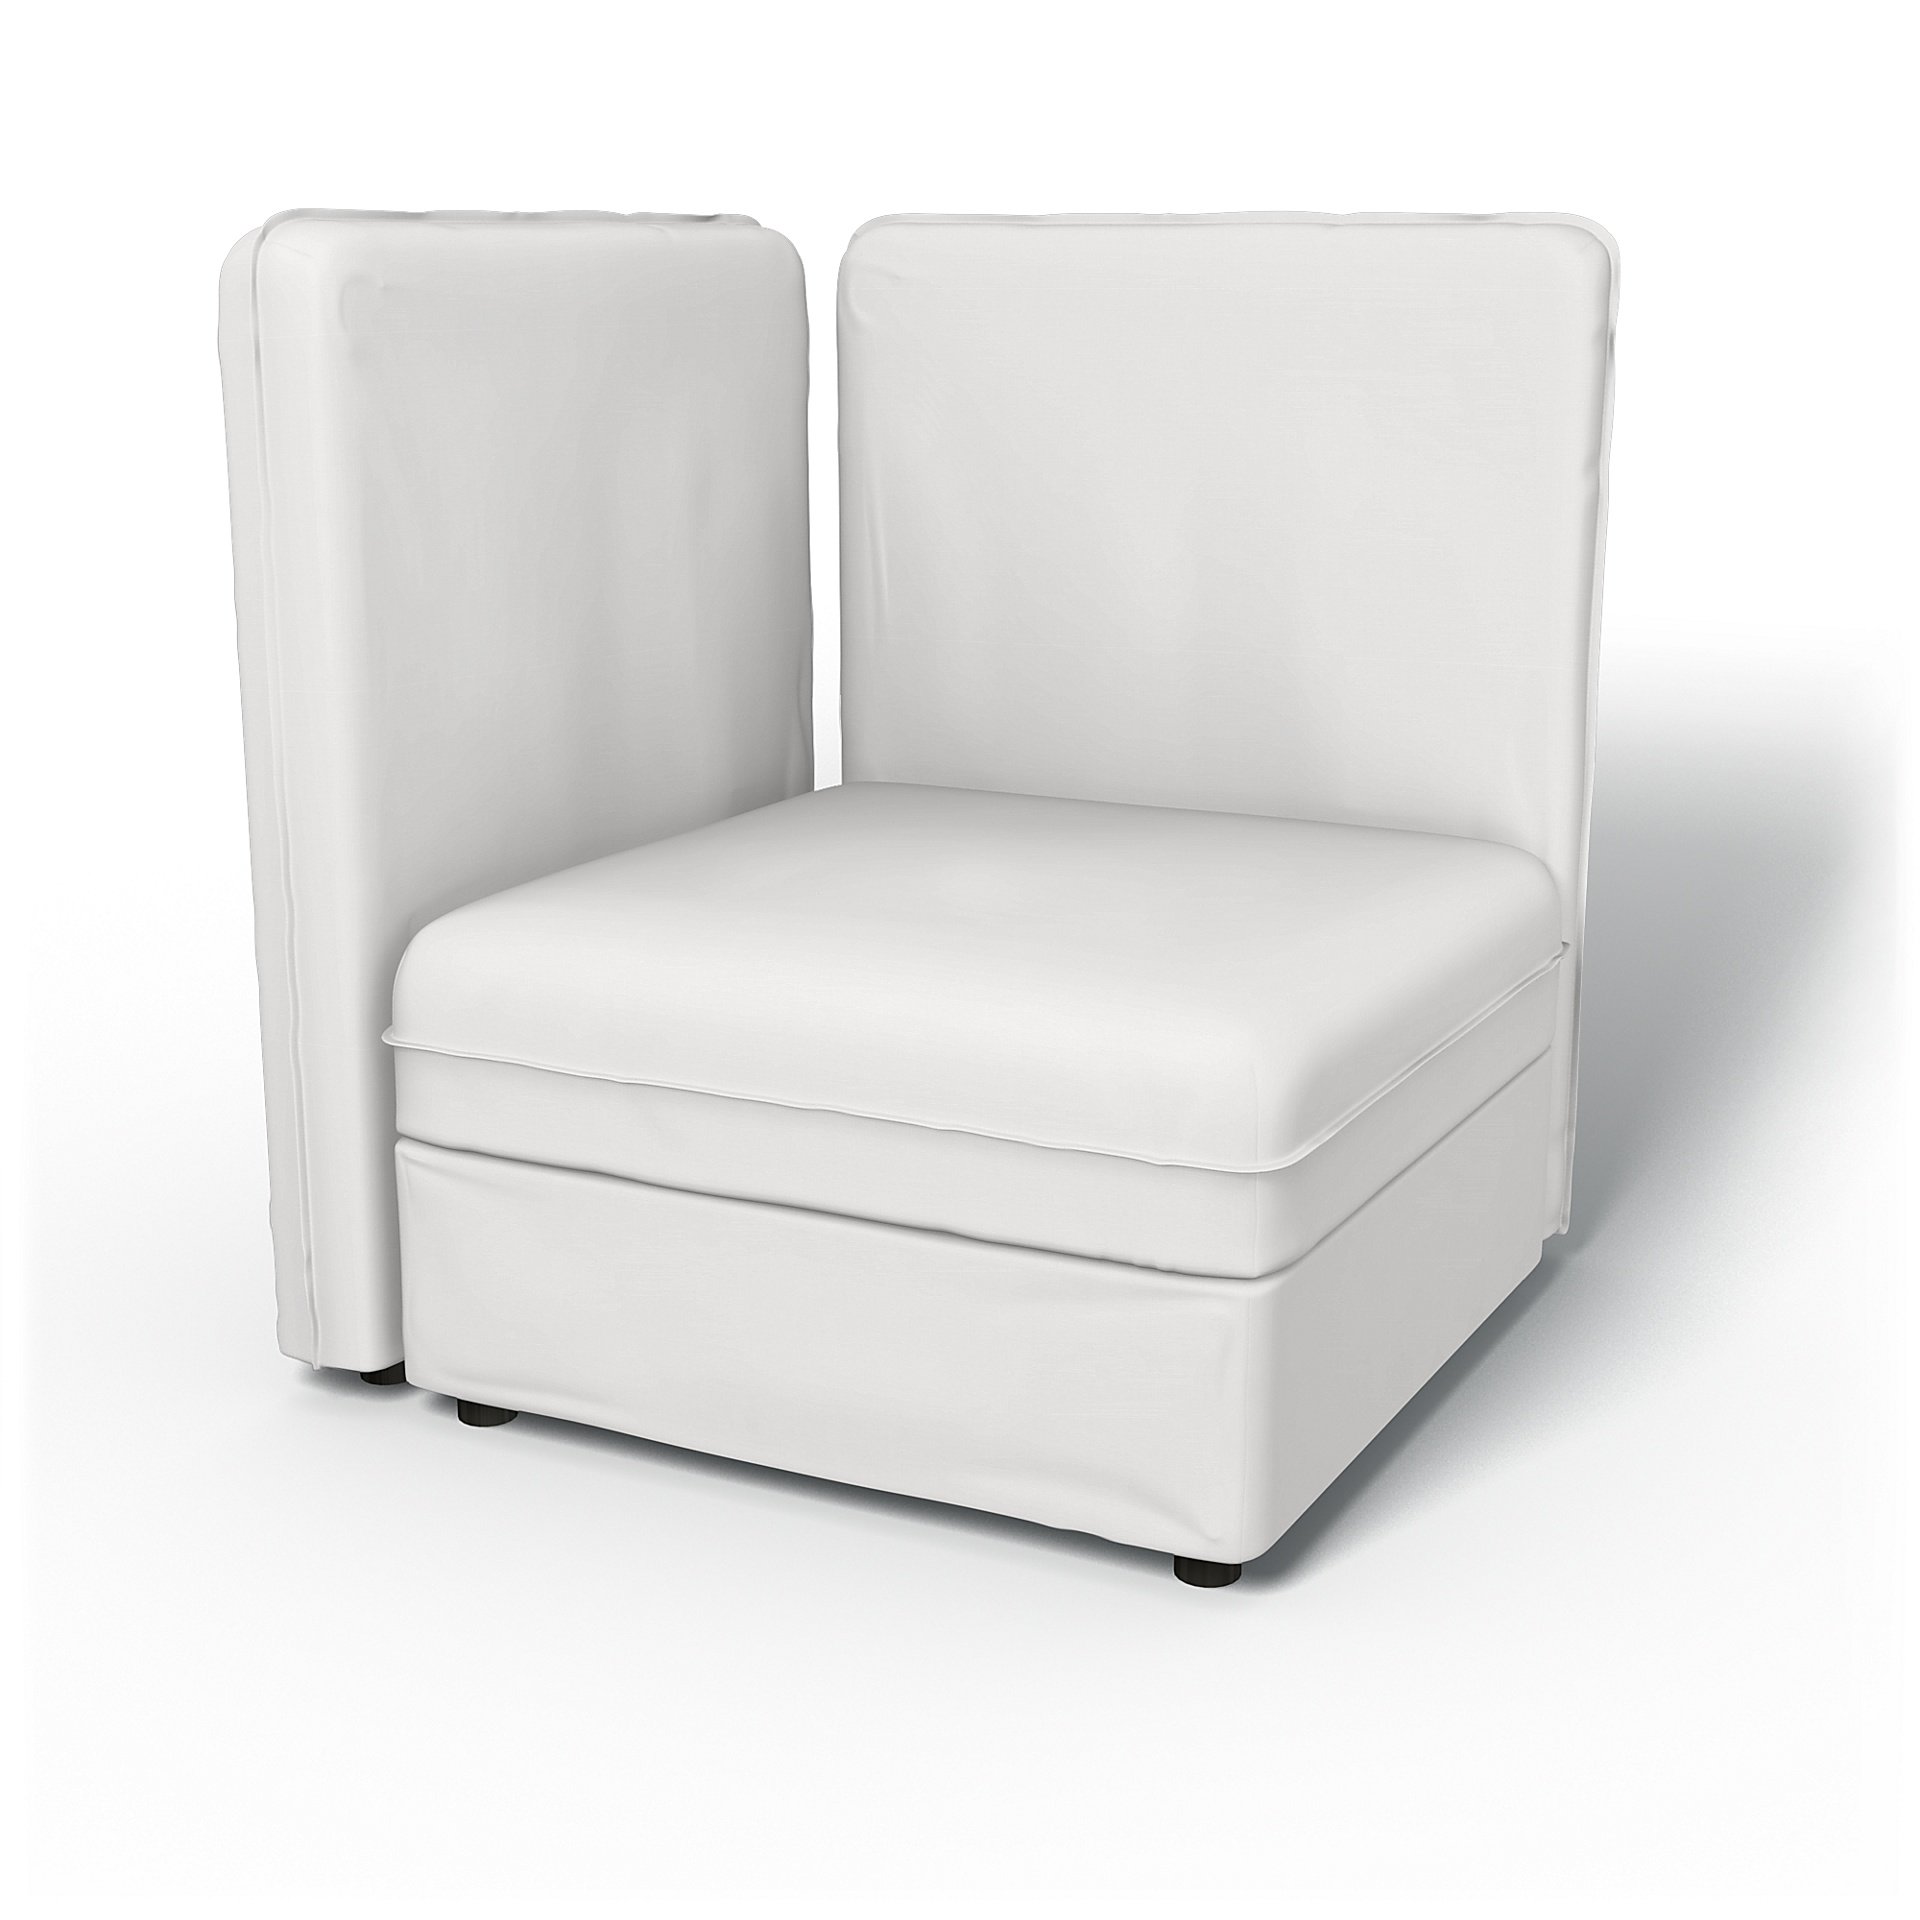 IKEA - Vallentuna Corner Seat Module with High Back and Storage Cover 80x80 32x32in, Absolute White,